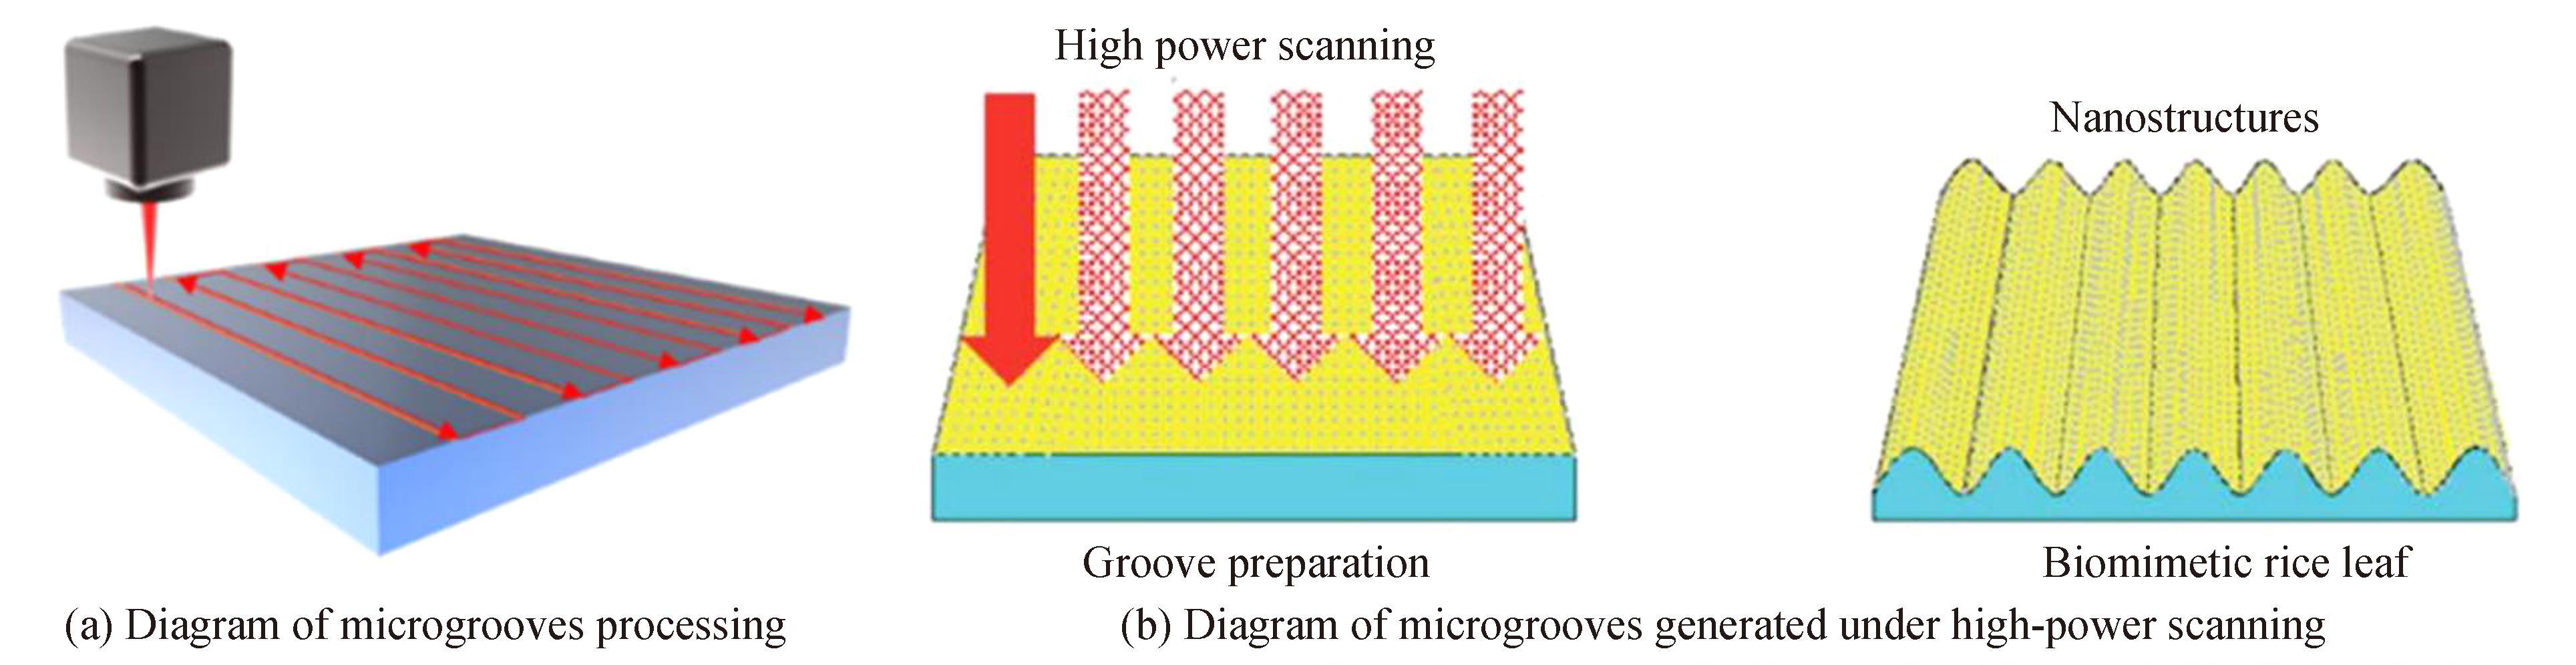 Preparation of microgrooves structure by femtosecond laser［23-24］